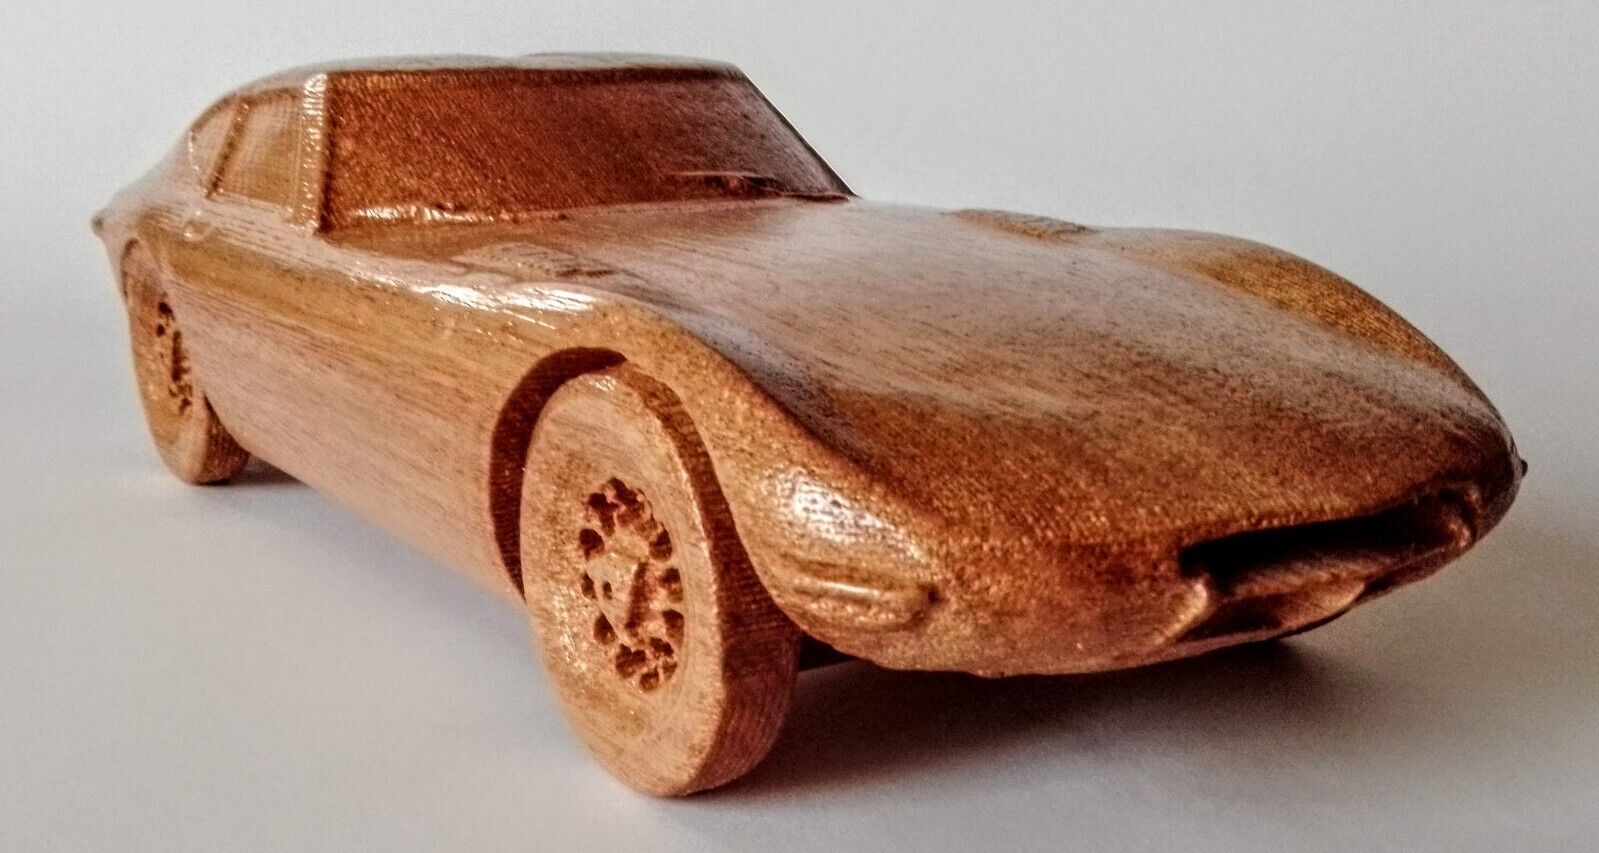 Toyota 2000 GT - 1:13 Wood Car Scale Model Replica Oldtimer Vintage Edition Toy